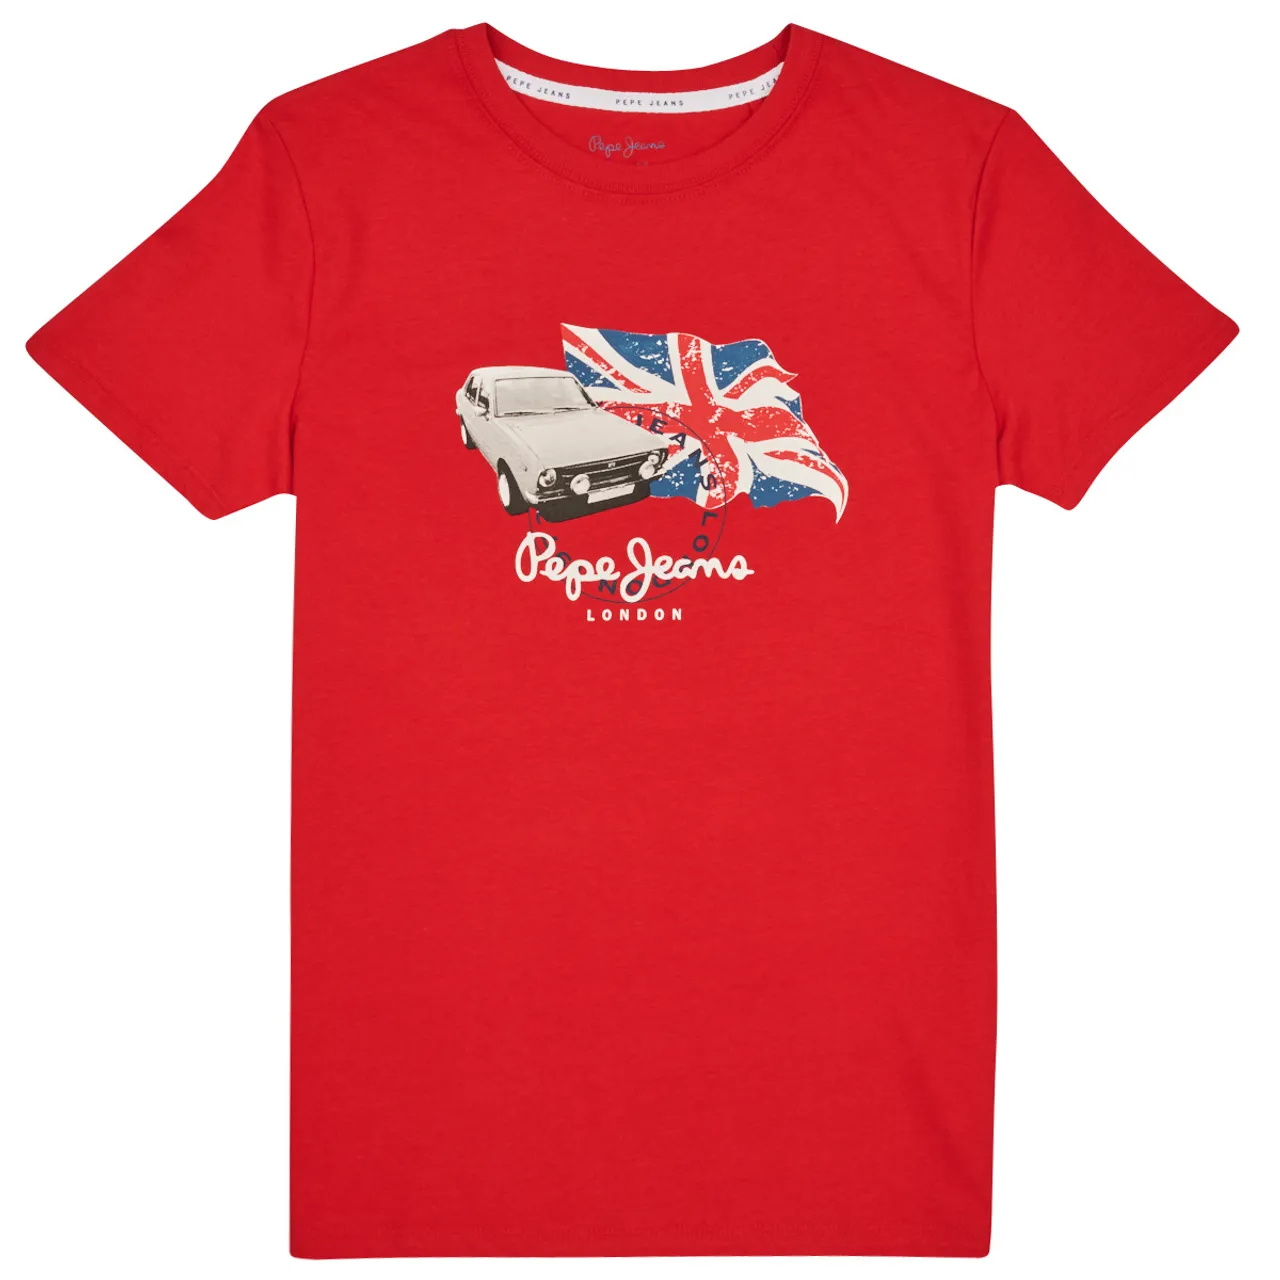 Pepe jeans  TROY TEE  boys's Children's T shirt in Red